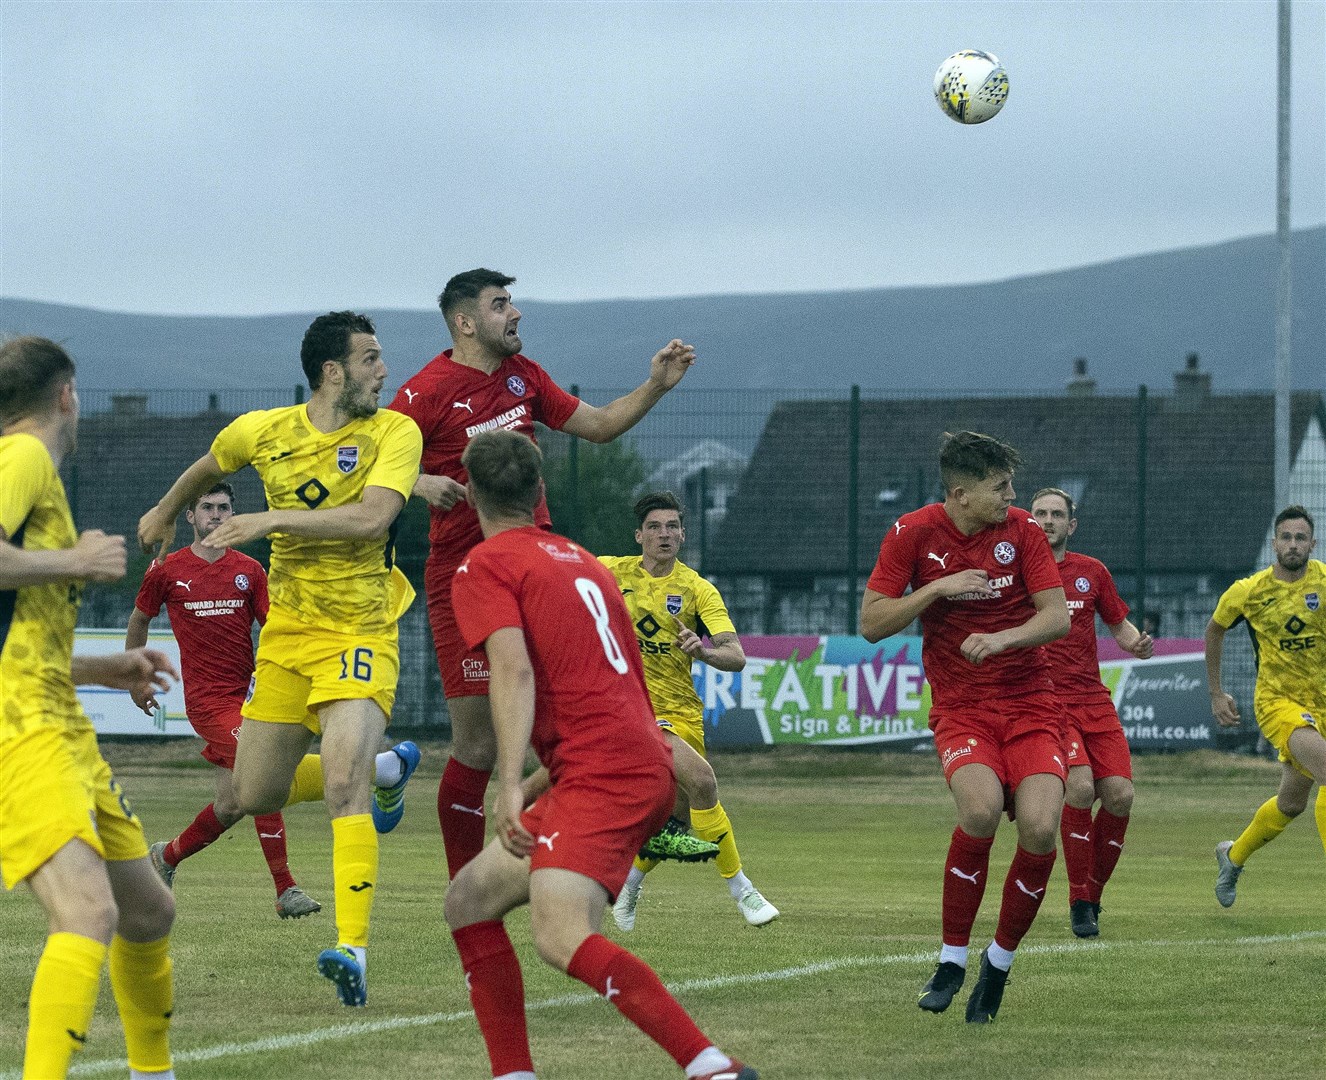 Picture - Ken Macpherson, Inverness. Scottish Premier Sports Cup. Brora Rangers(0) v Ross County(1). 21.07.21. Ross County's Alex Iacovitti rises above Brora’s Jordan Macrae to head in the only goal of the game past Brora 'keeper Joe Malin.